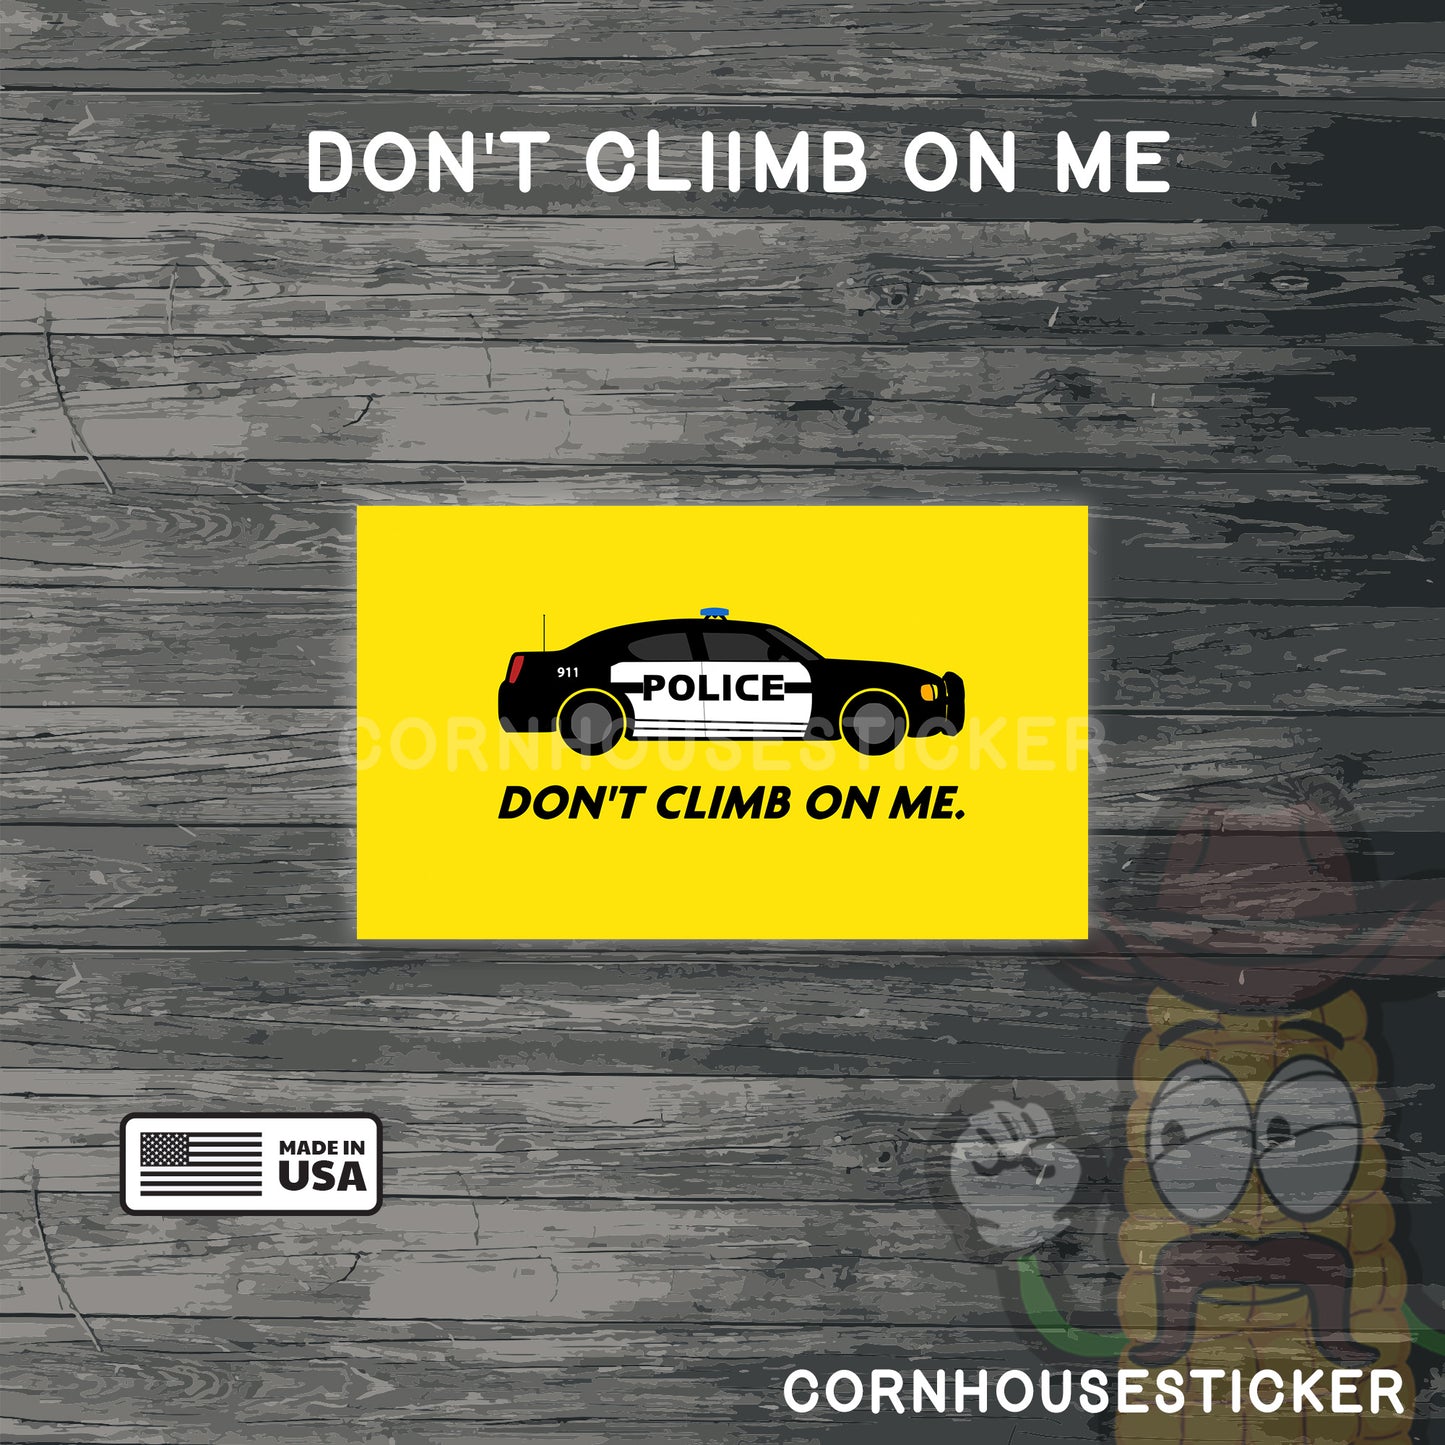 Don't climb on me. "Gadsden flag" | Police officer stickers